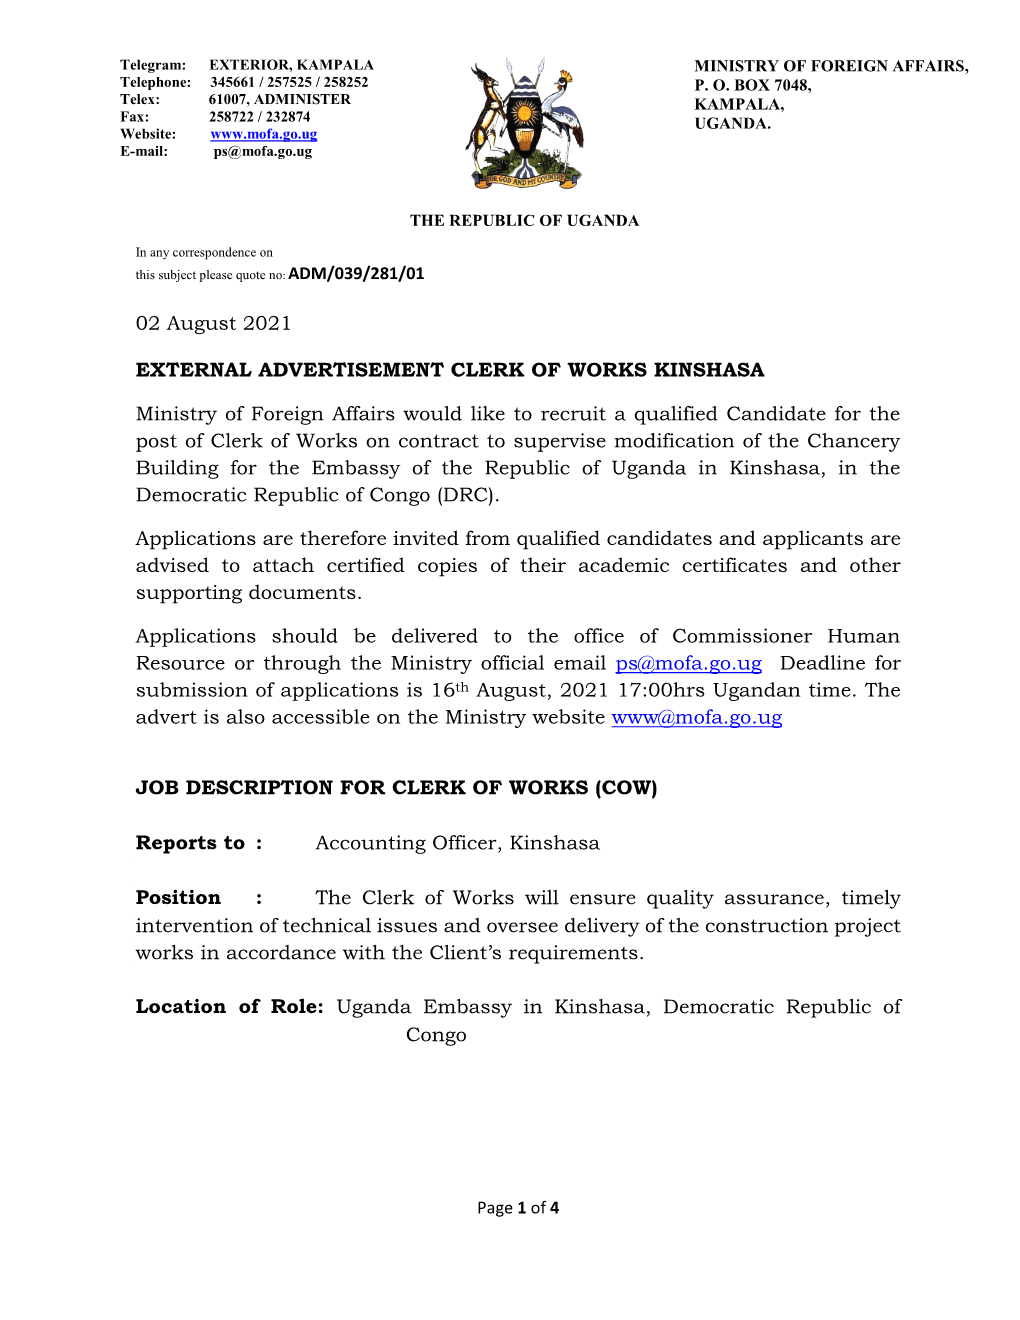 02 August 2021 EXTERNAL ADVERTISEMENT CLERK of WORKS KINSHASA Ministry of Foreign Affairs Would Like to Recruit a Qualified Cand